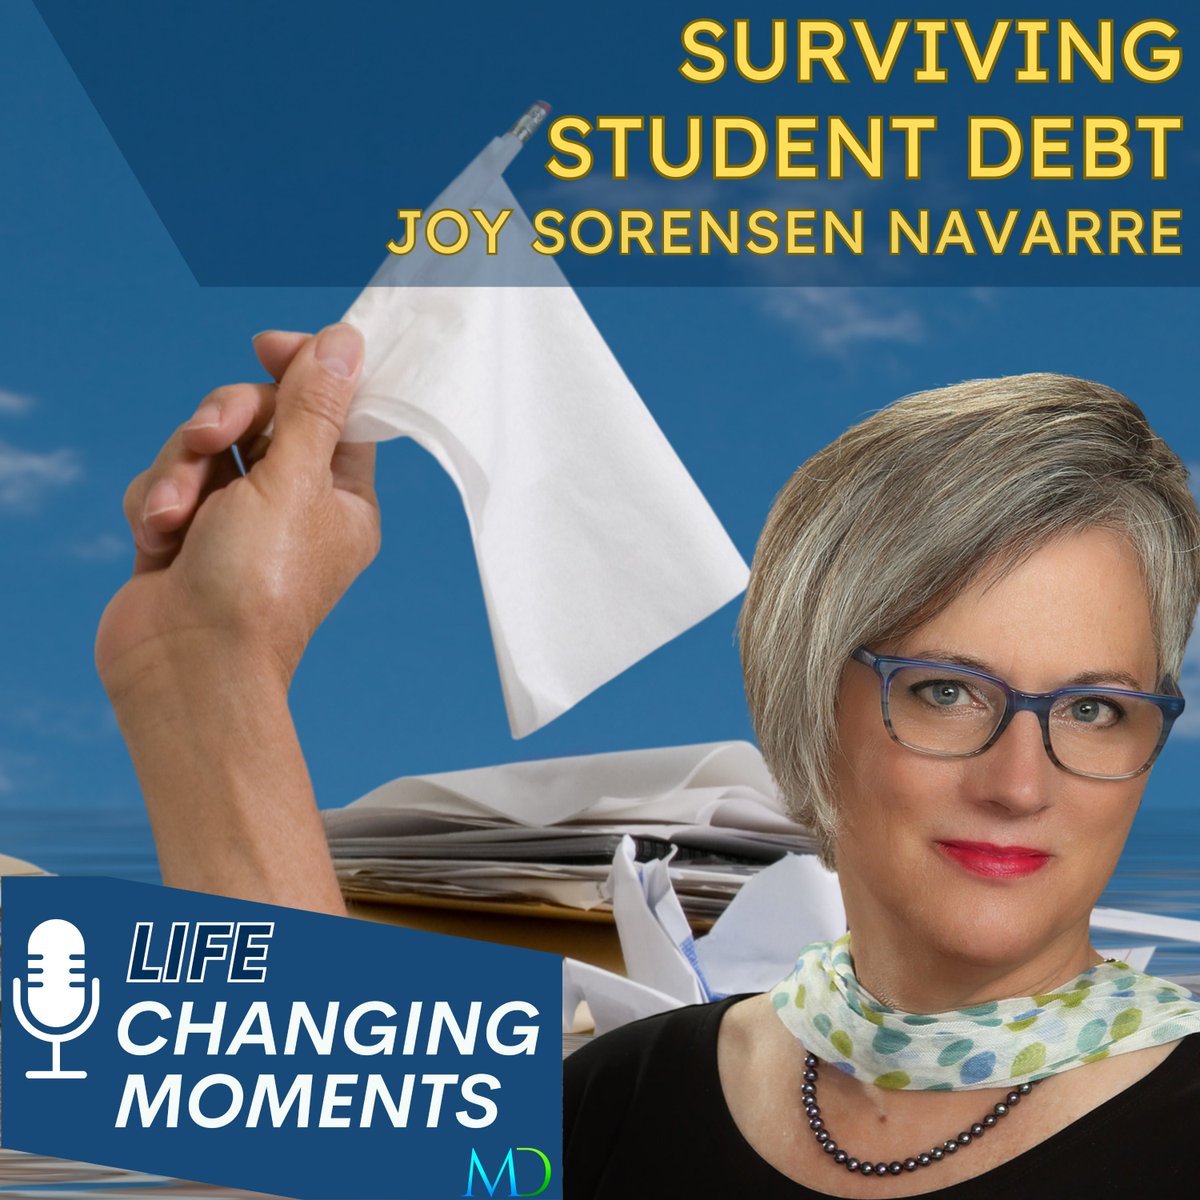 Learn about surviving #StudentDebt from Joy Sorensen Navarre this week's guest on @CoachesMd's Life Changing Moments podcast at mymdcoaches.com/podcast/episod…!